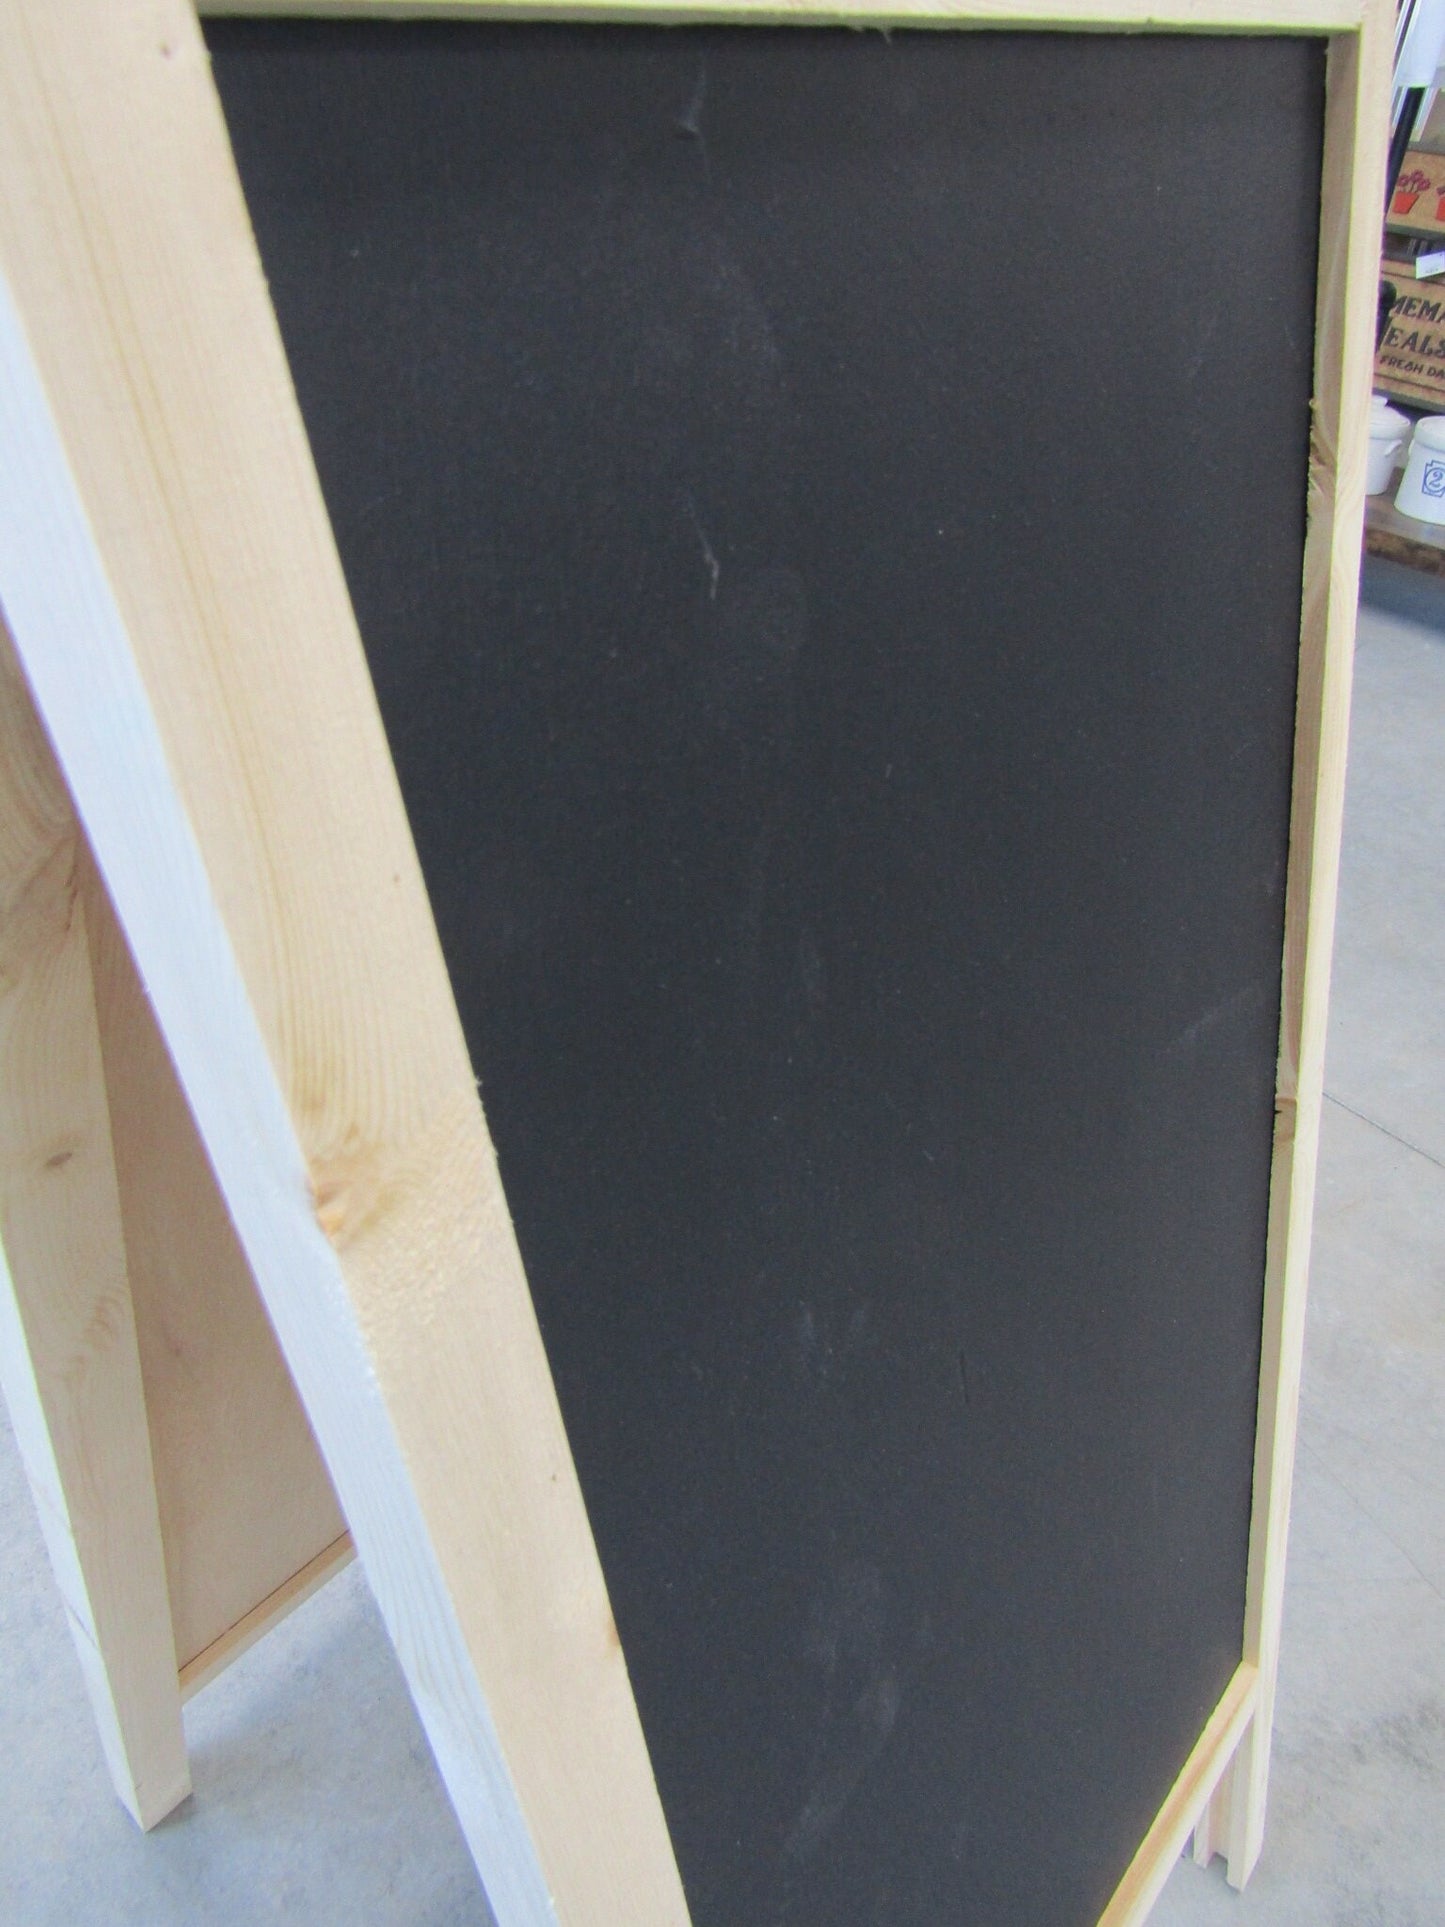 Chalk Board Daily Specials Sidewalk Sandwich Board A Frame Folding Affordable Info Sign Free Standing Extra Large Commercial Hinge Outdoor